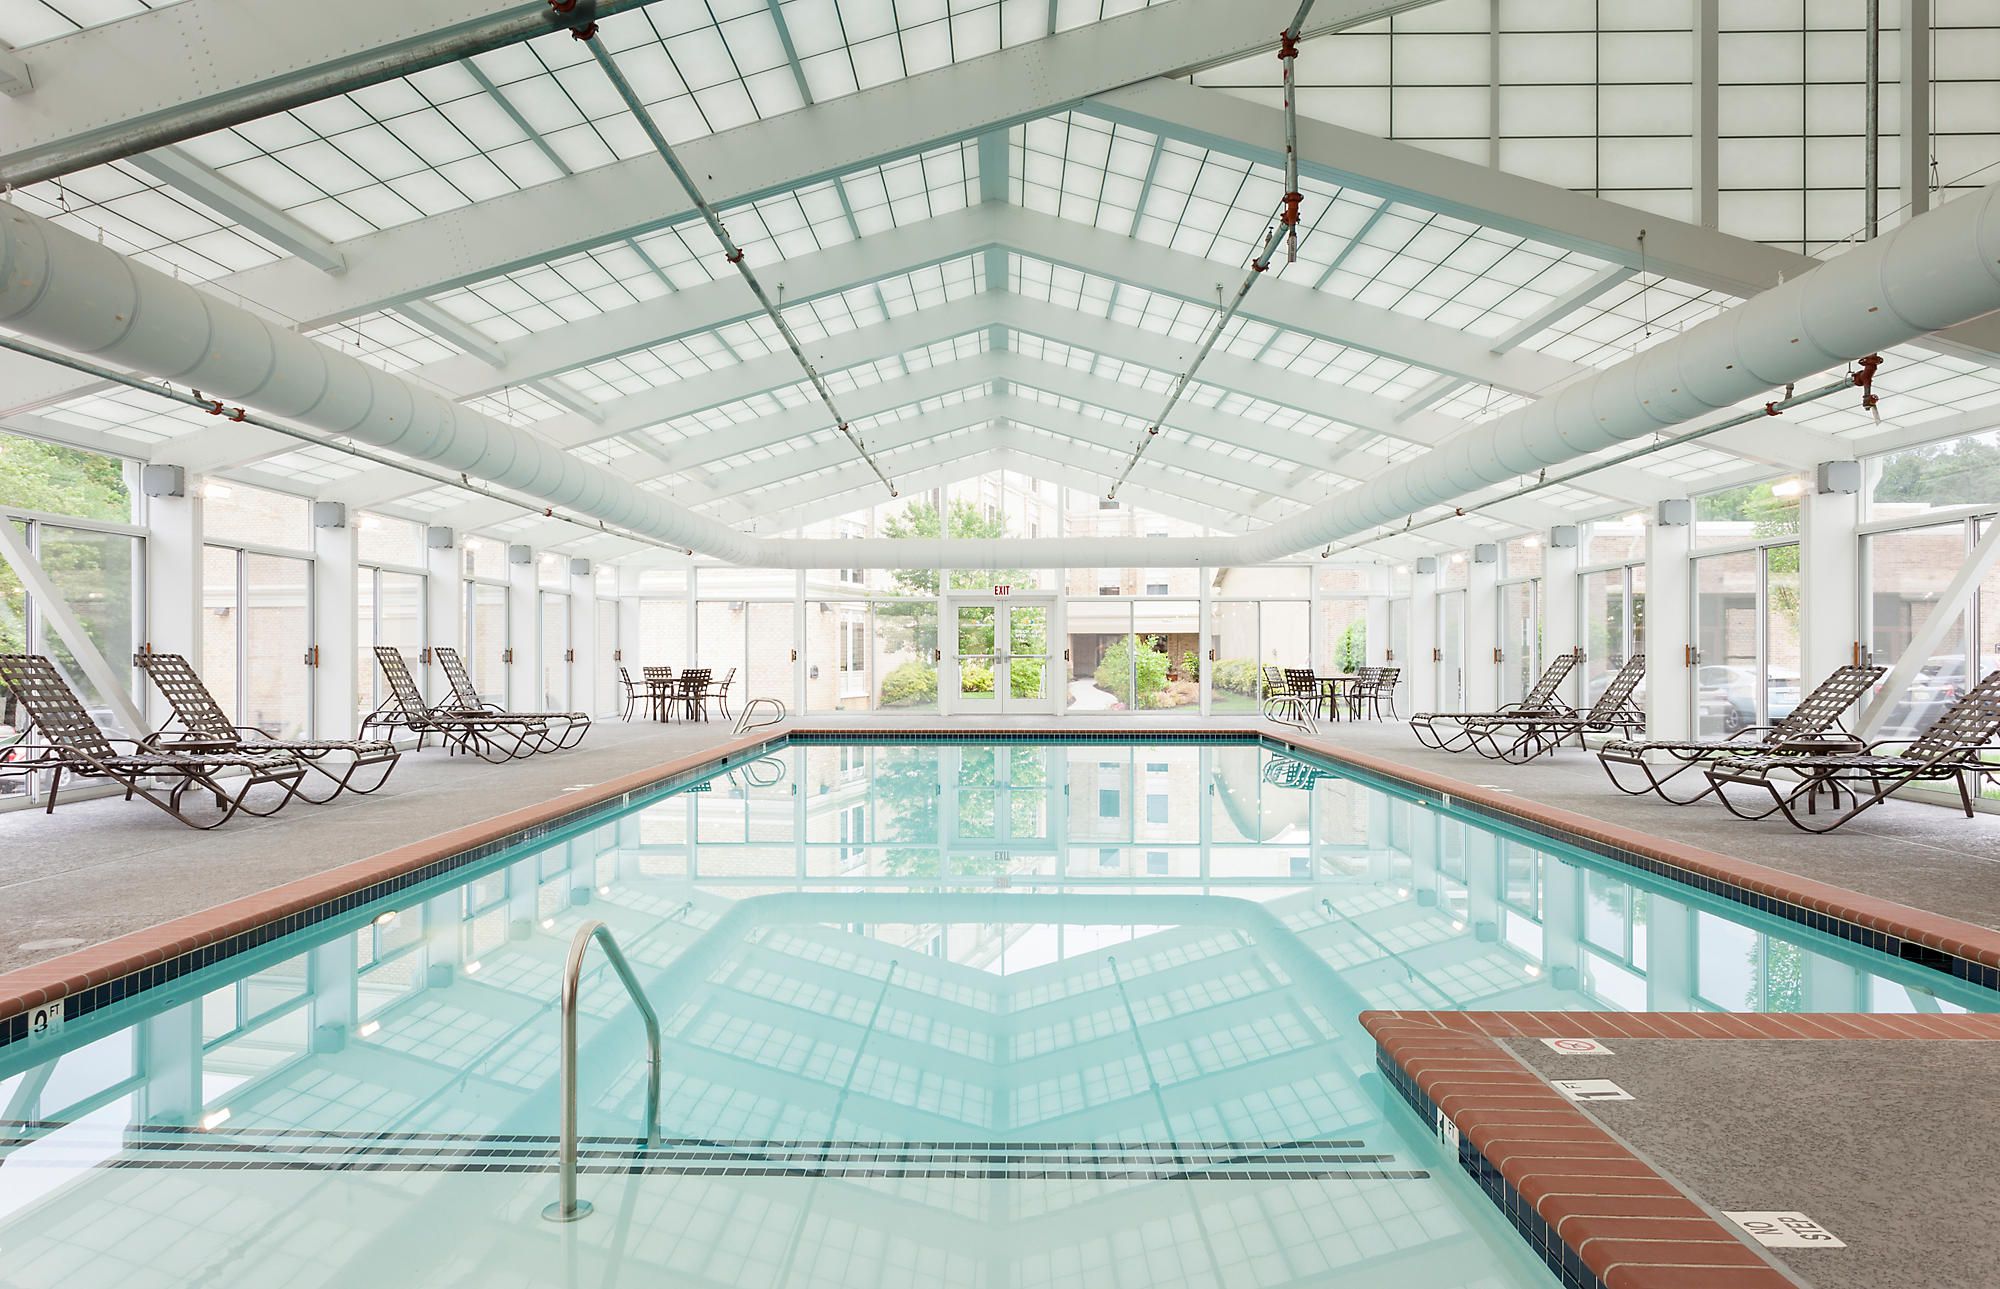 Bluegreen Vacations Patrick Henry Square Indoor Swimming Pool